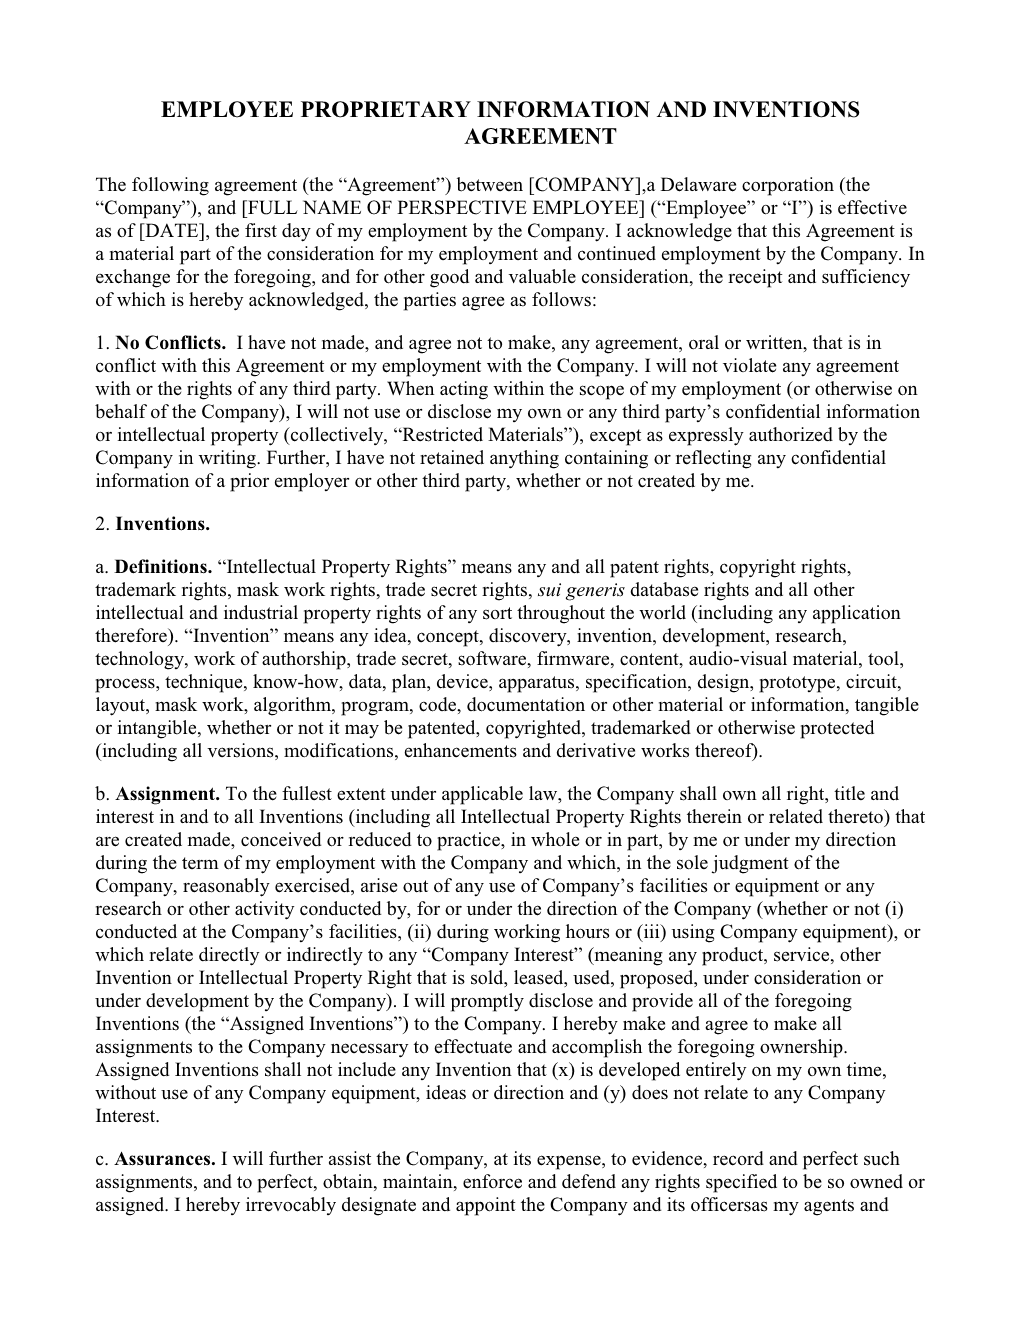 Employee Proprietary Information and Inventions Agreement